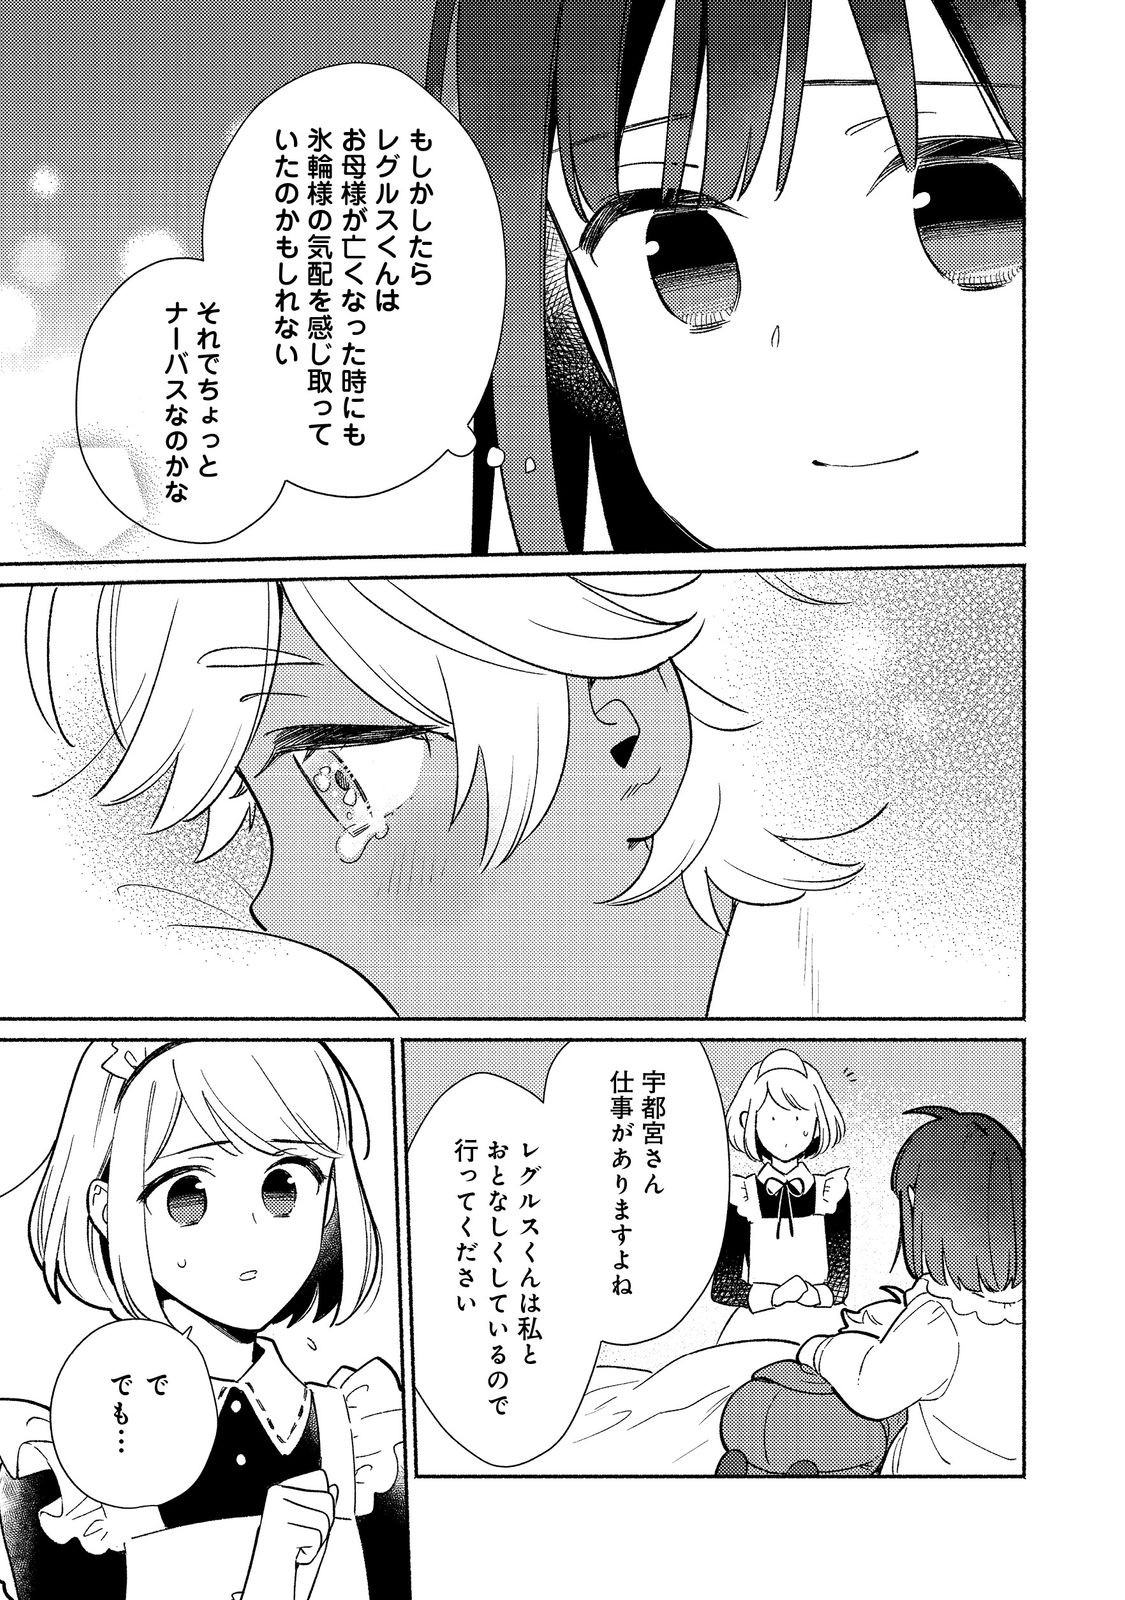 I’m the White Pig Nobleman 第22.2話 - Page 5